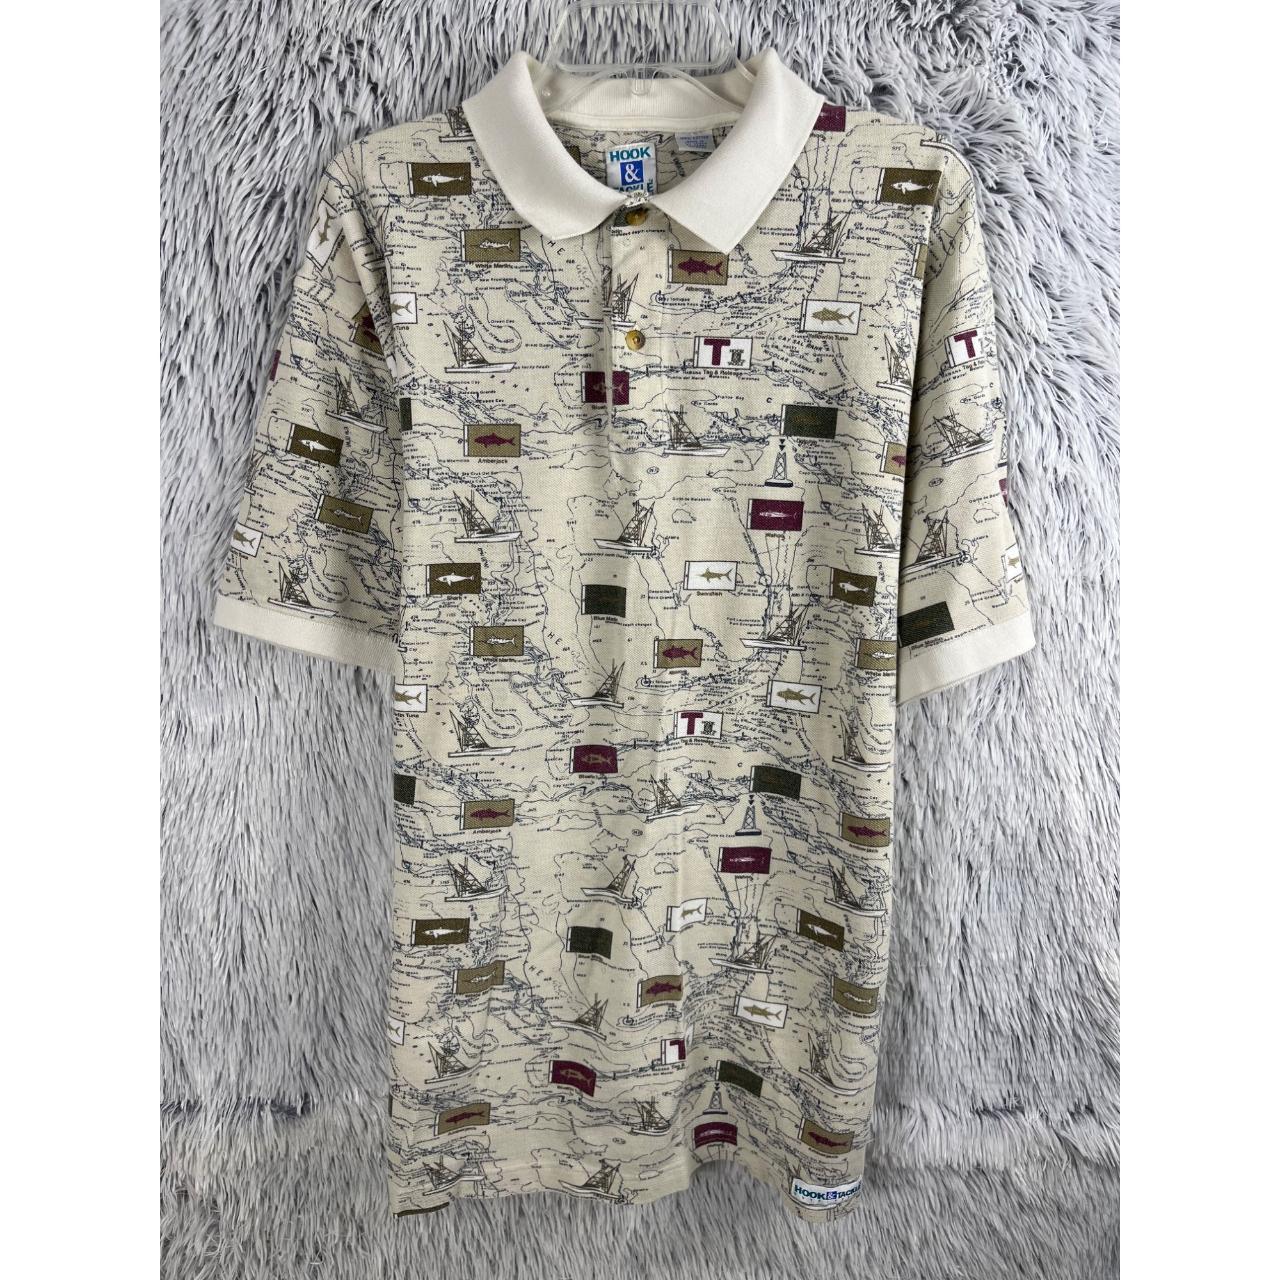 Vintage Hook and Tackle Button Up Shirt